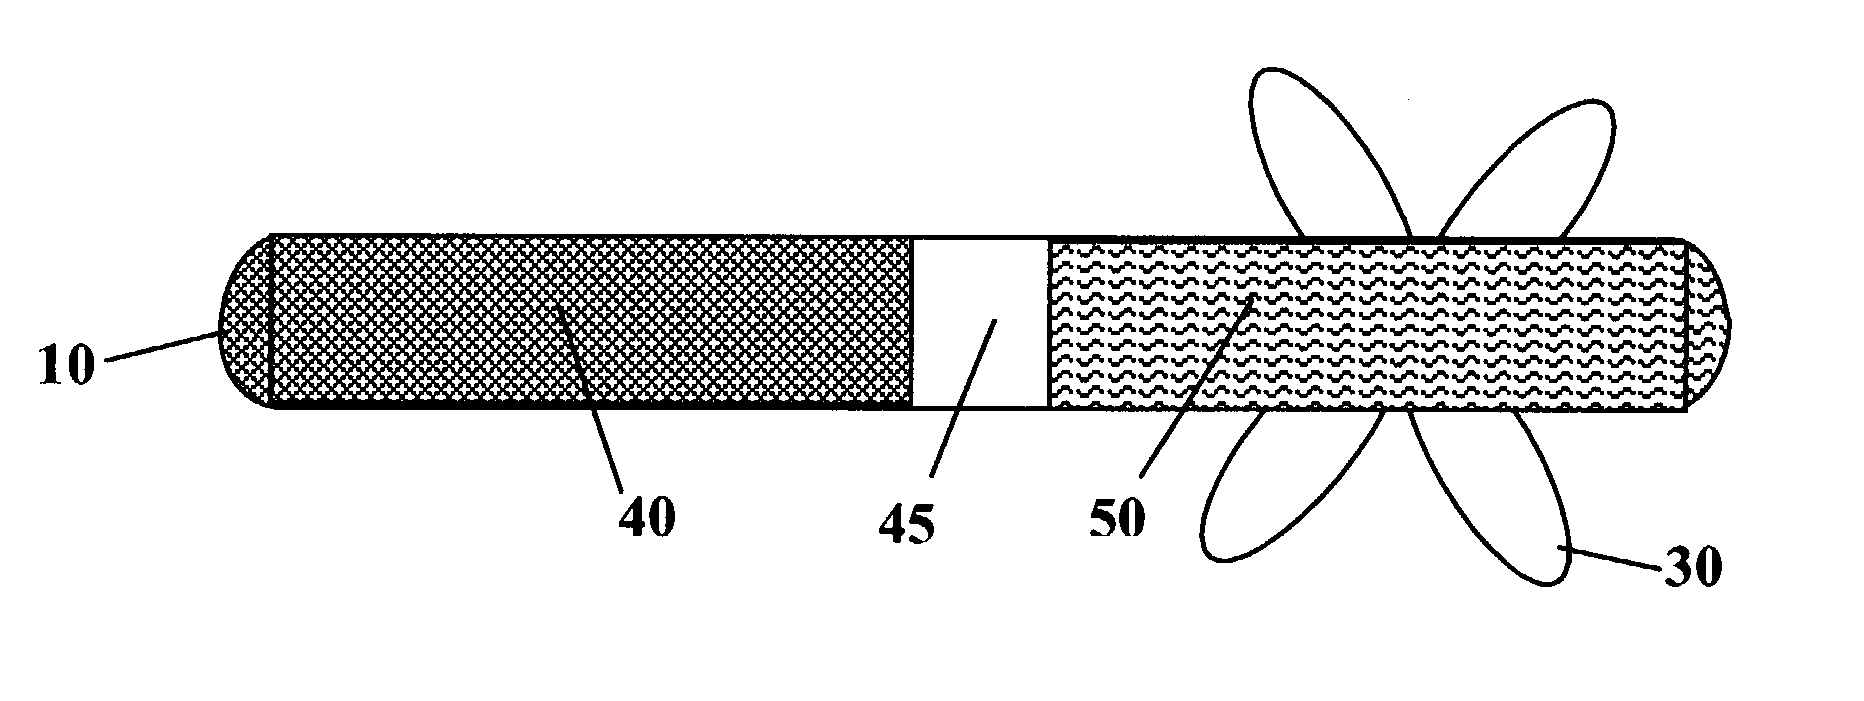 Child's barrette and method of application